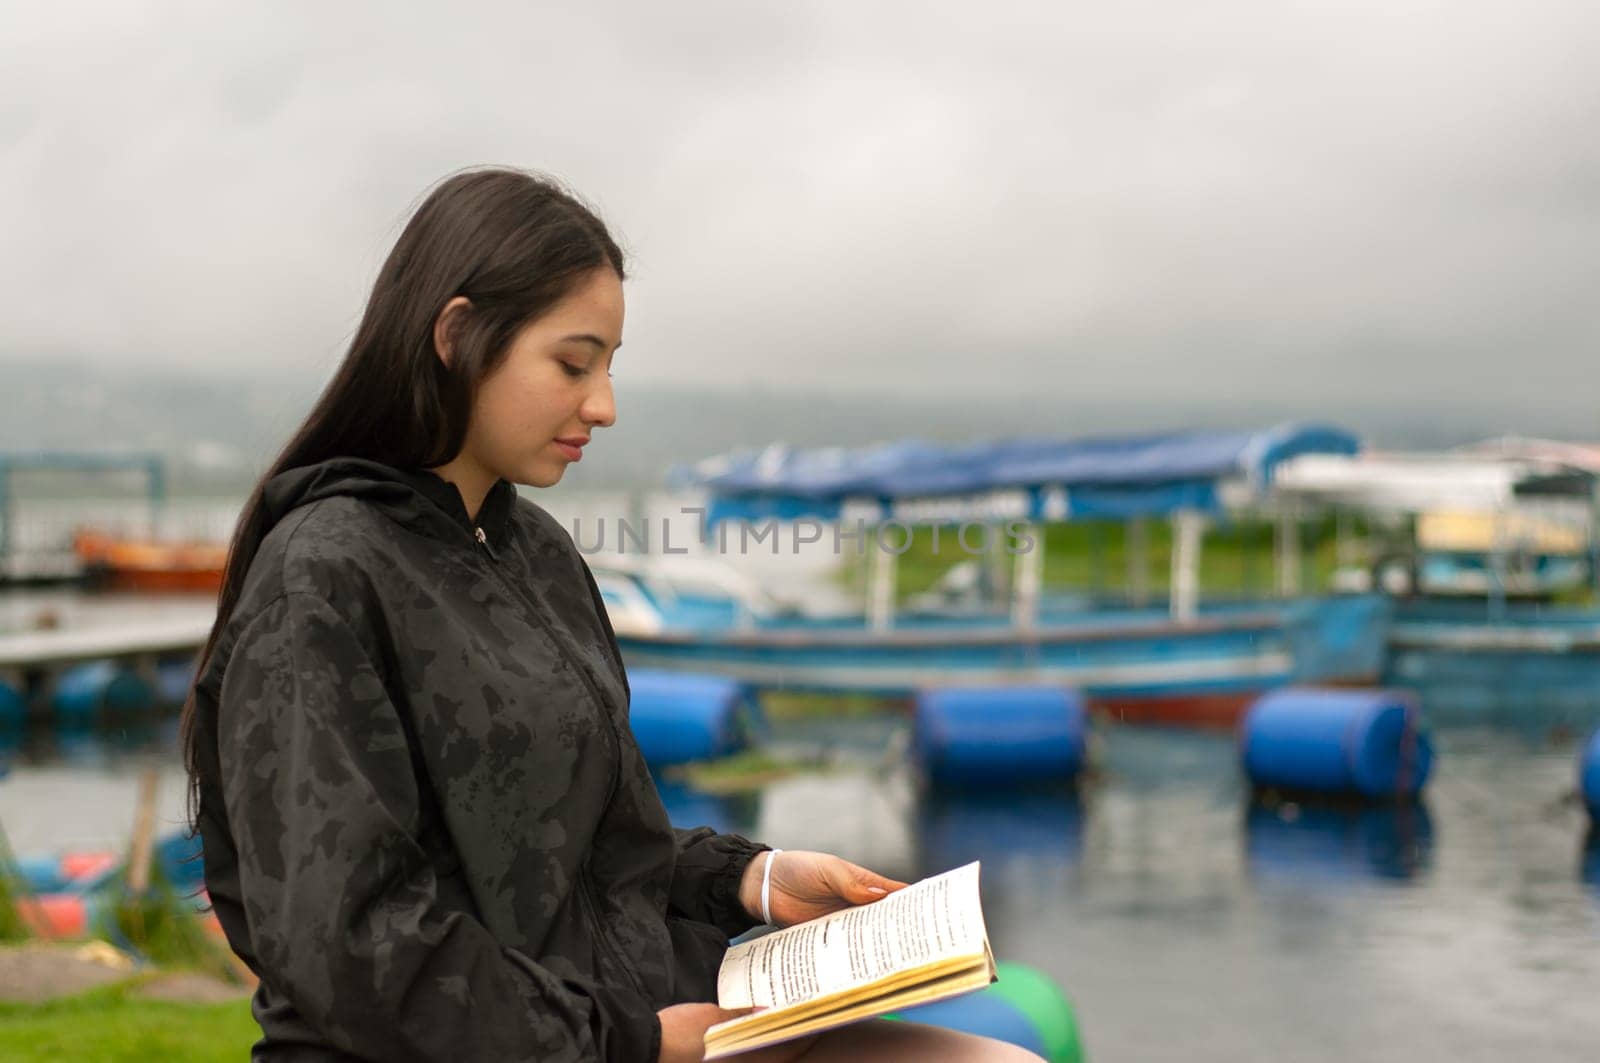 attractive young man from latin america sitting by a pier with boats reading a book while it rains. book day by Raulmartin